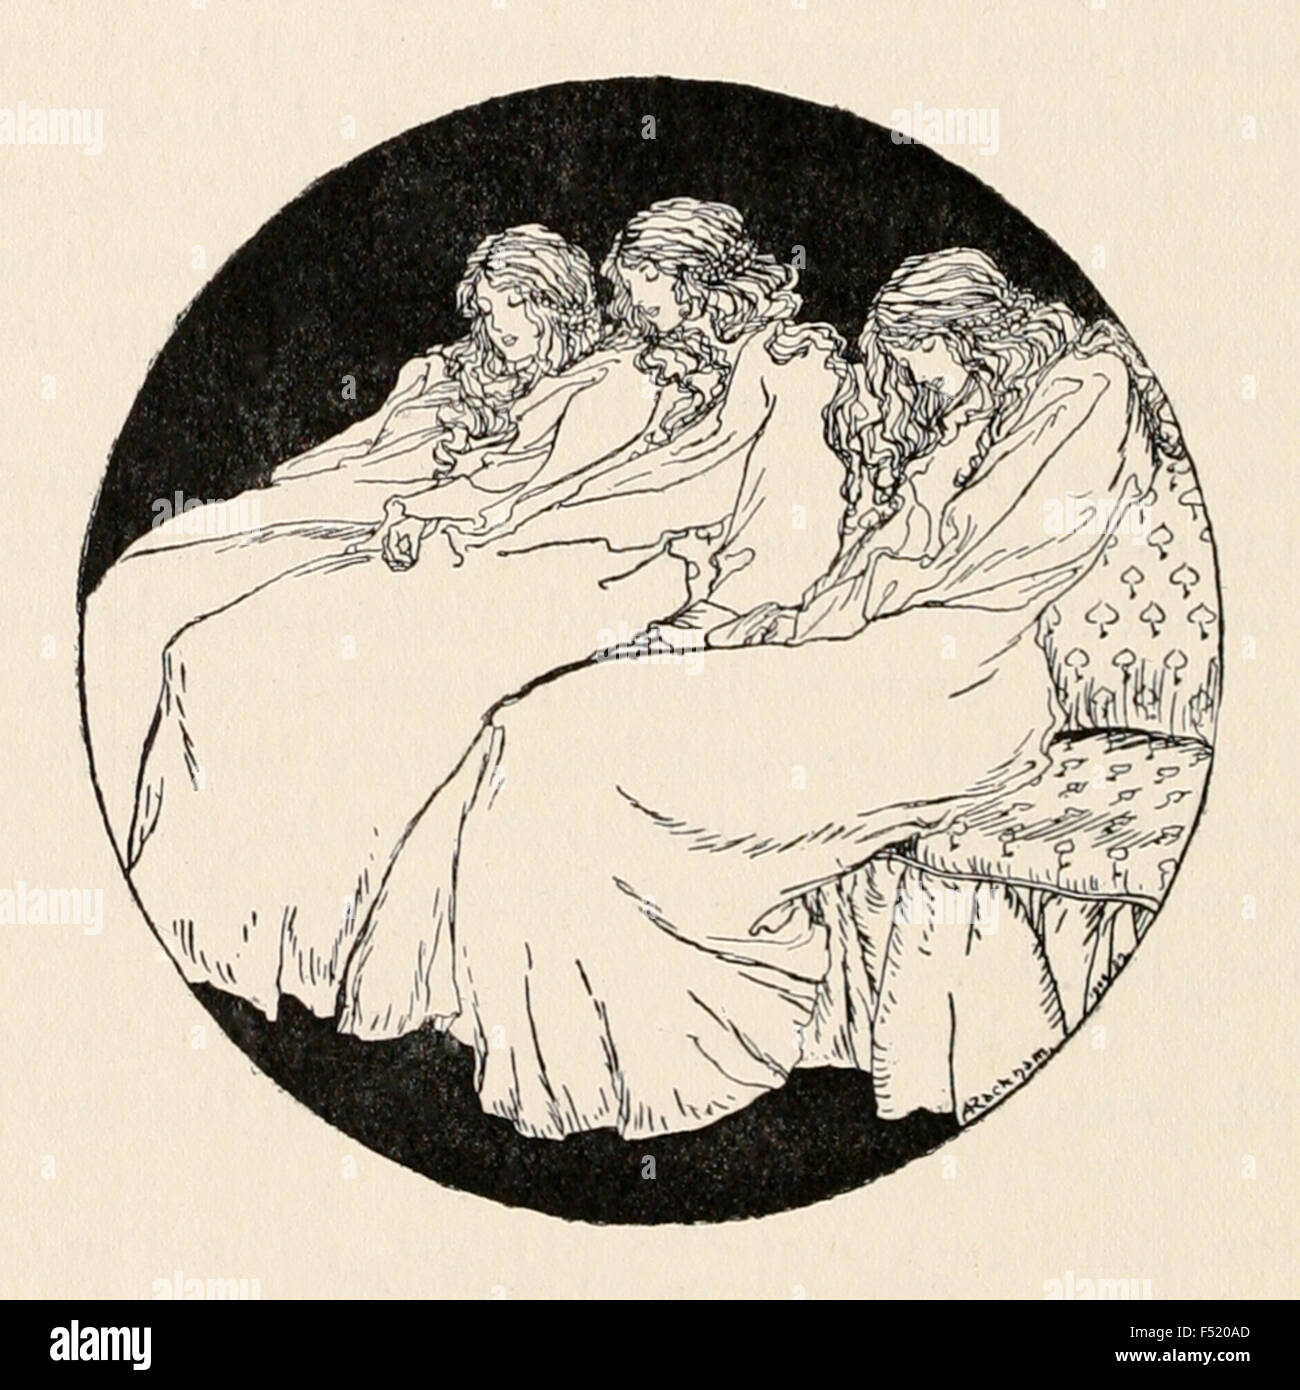 'The Three Sleeping Princesses' from 'The Queen Bee' in ‘The Fairy Tales of the Brother's Grimm', illustration by Arthur Rackham (1867-1939). See description for more information. Stock Photo